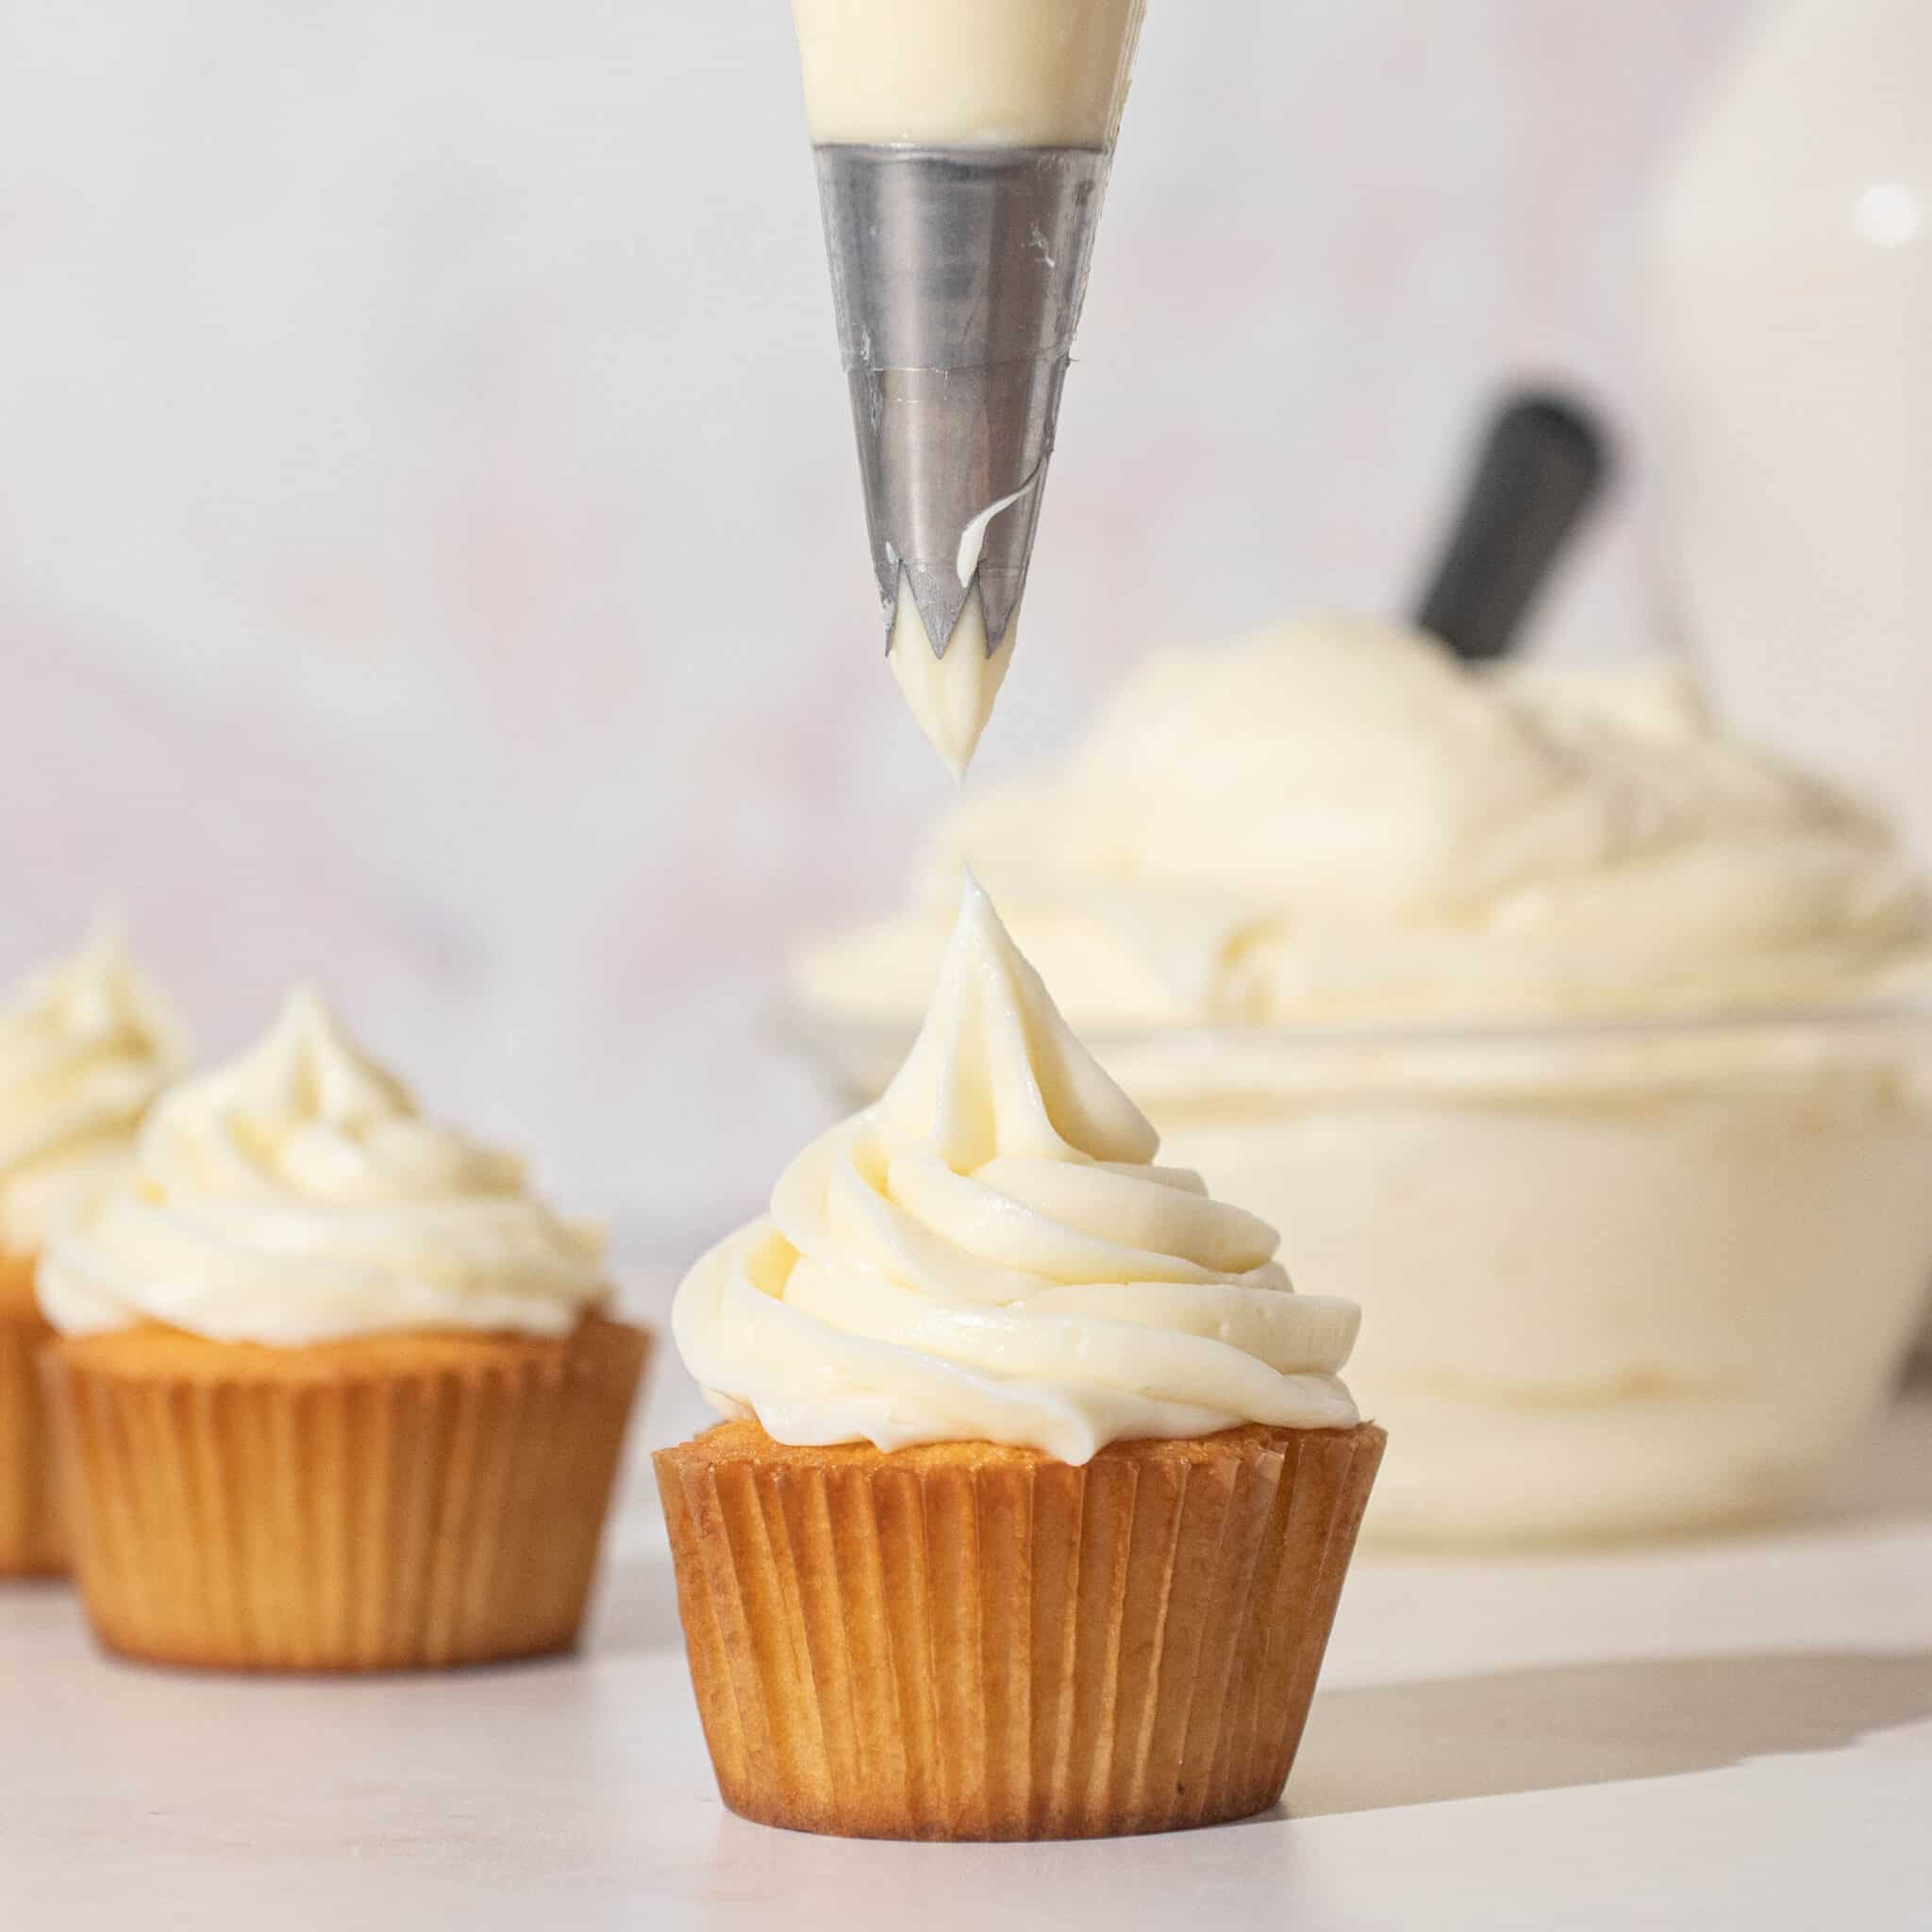 piping bag frosting a cupcake with cream cheese frosting